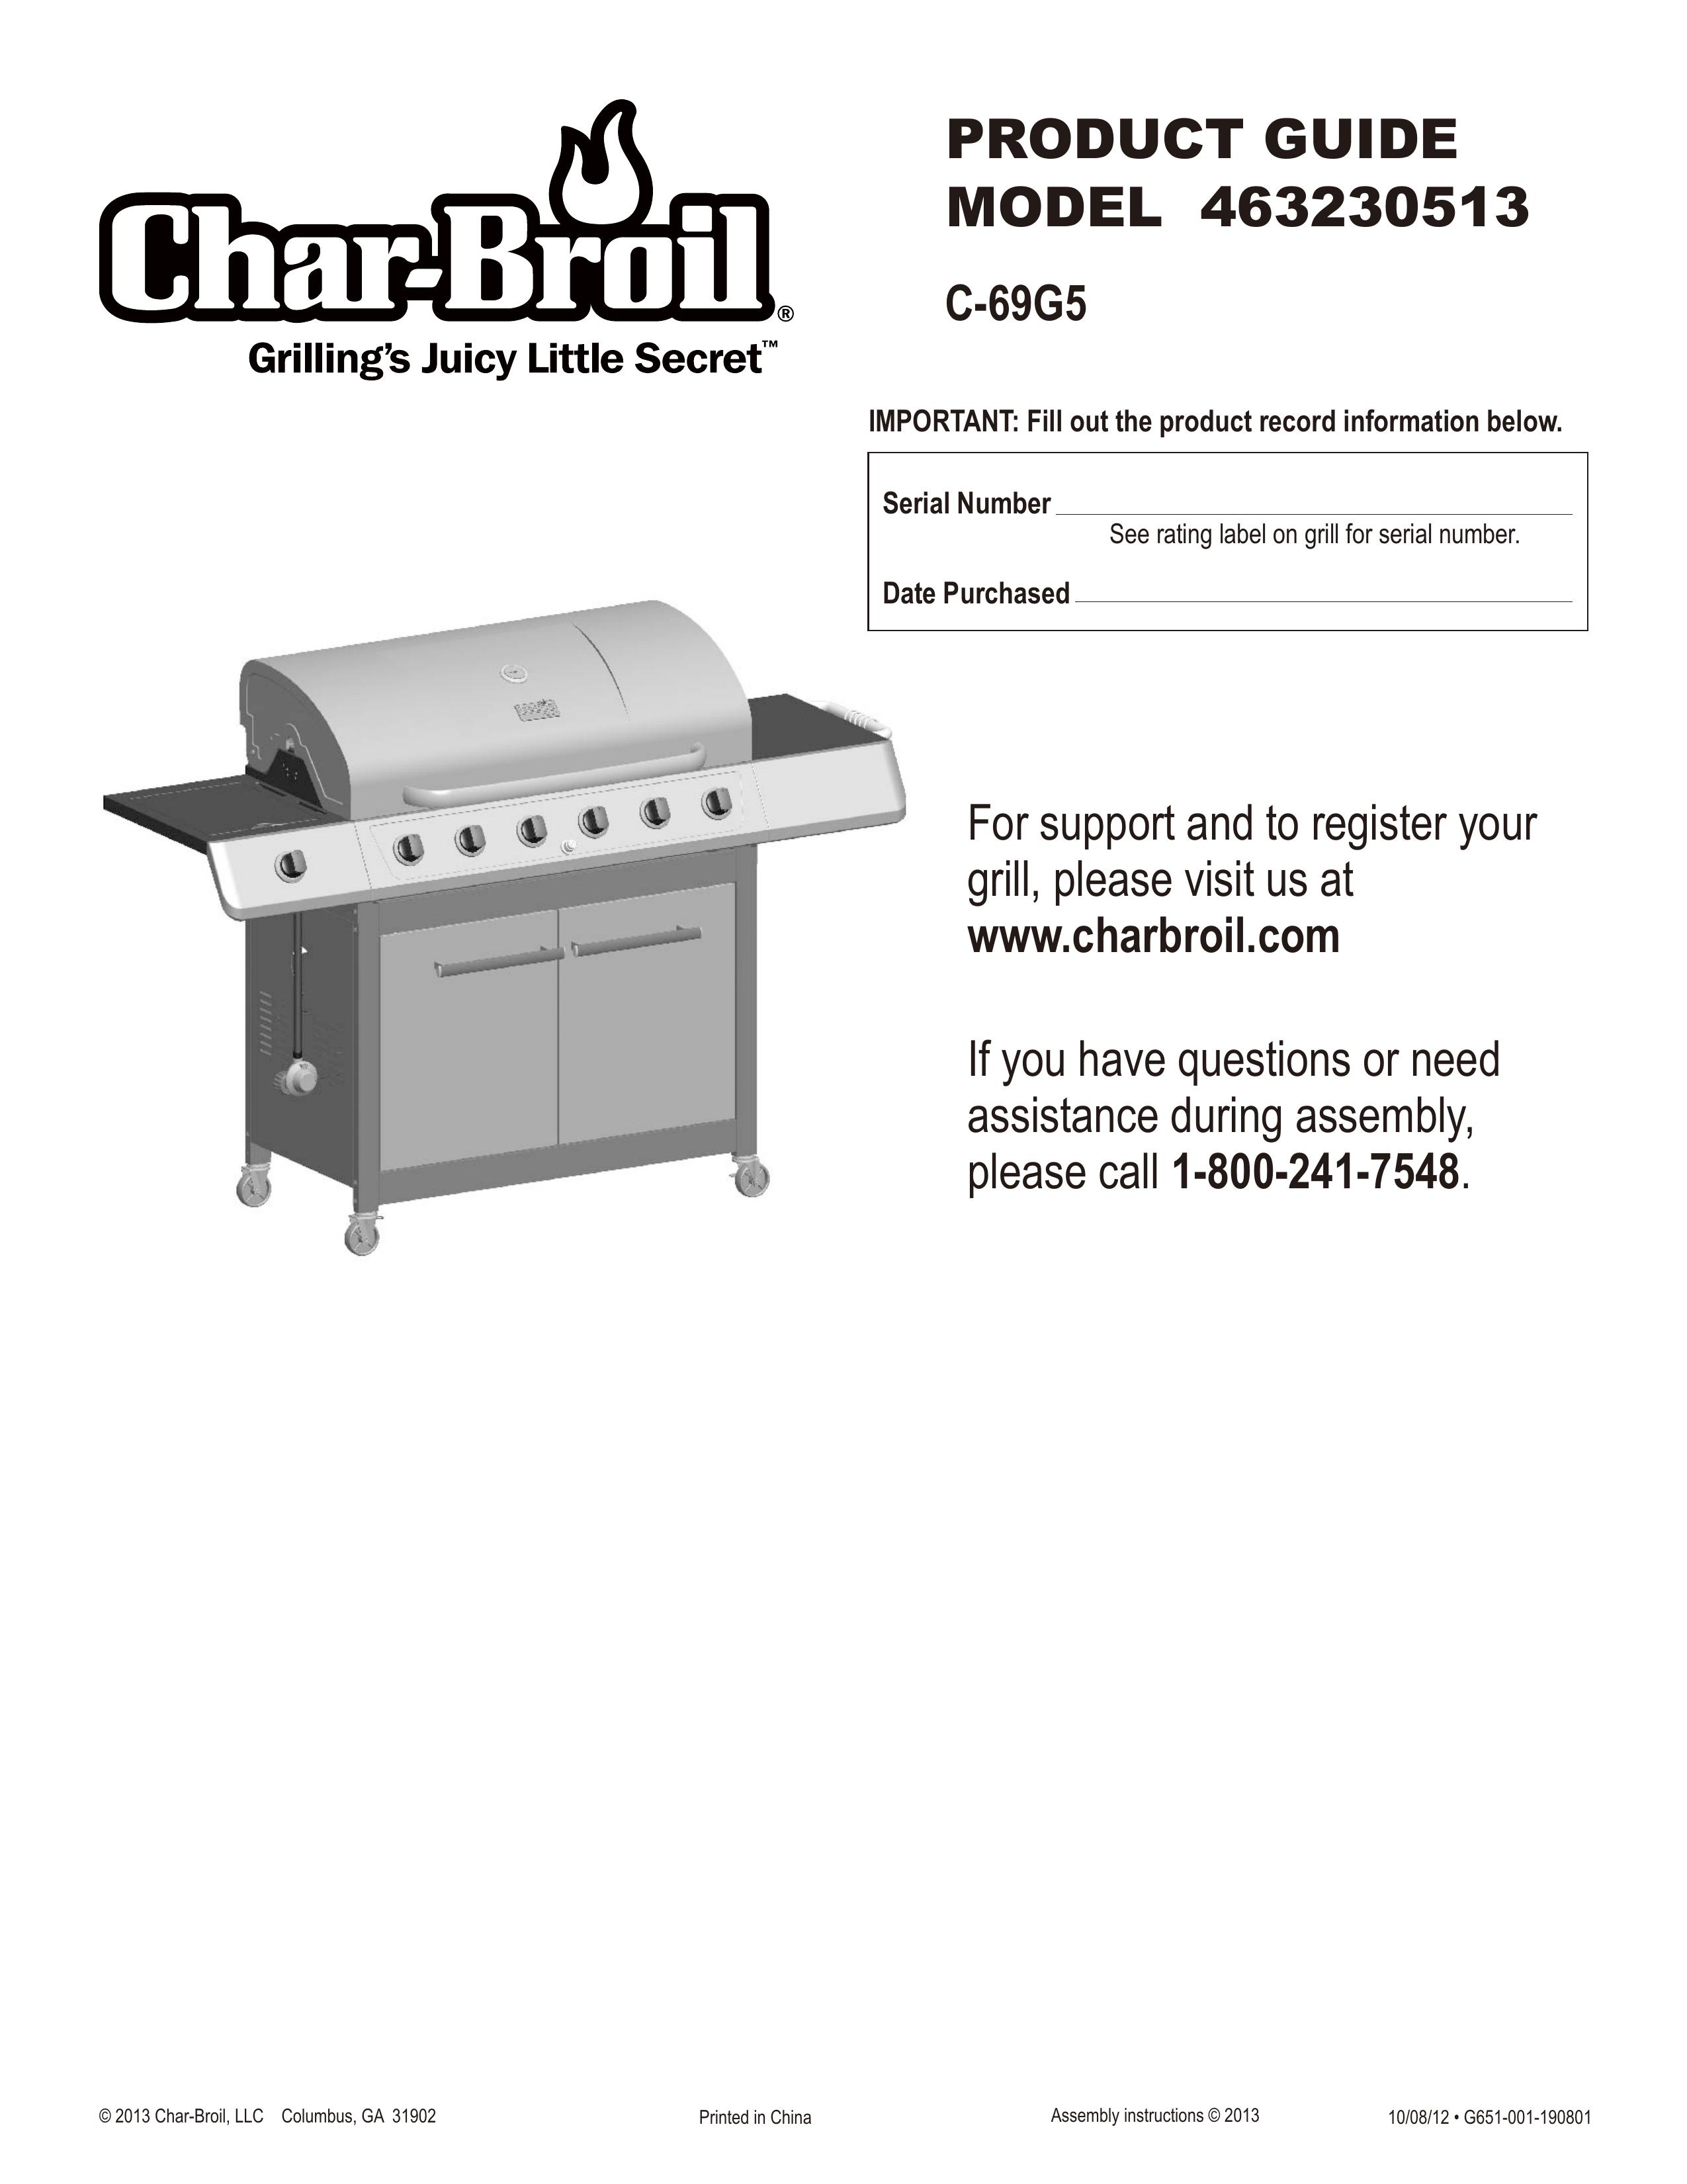 Char-Broil 463230513 Electric Grill User Manual